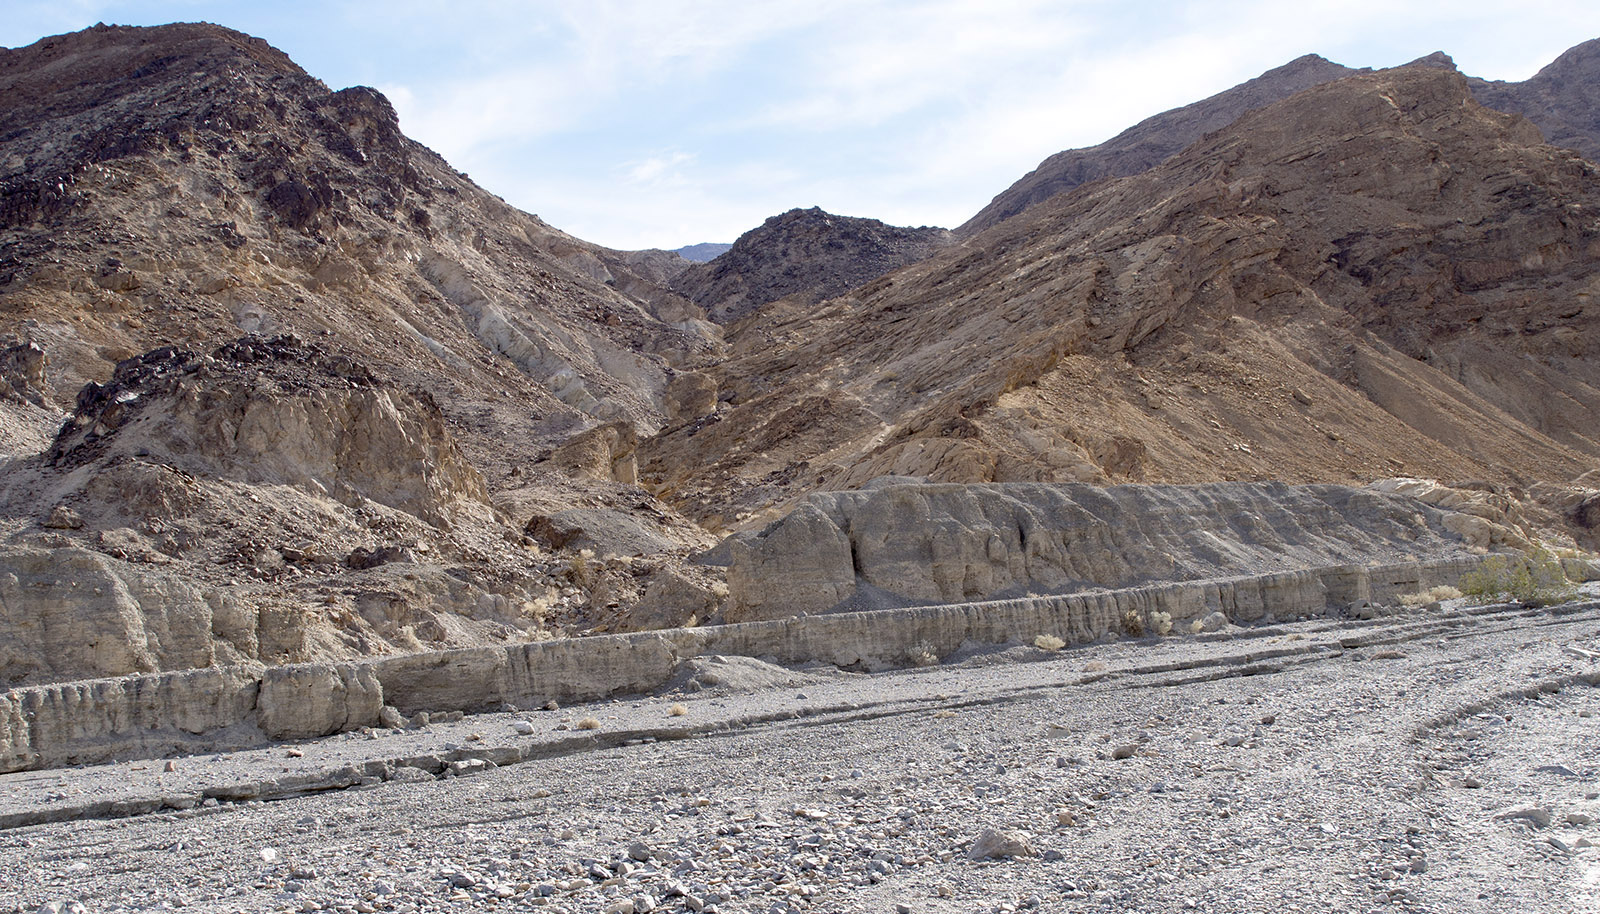 Mosaic Canyon Fault at the wash near the parking area (at bottom of V-shaped area).   To the right (West), are Noonday dolomite strata derived from algal carbonates (~635 MA – Neoproterozoic Era).  To the left (East) are Johnnie formation strata (~550 MA) rich in shale and Stirling quartzite (~500 MA).